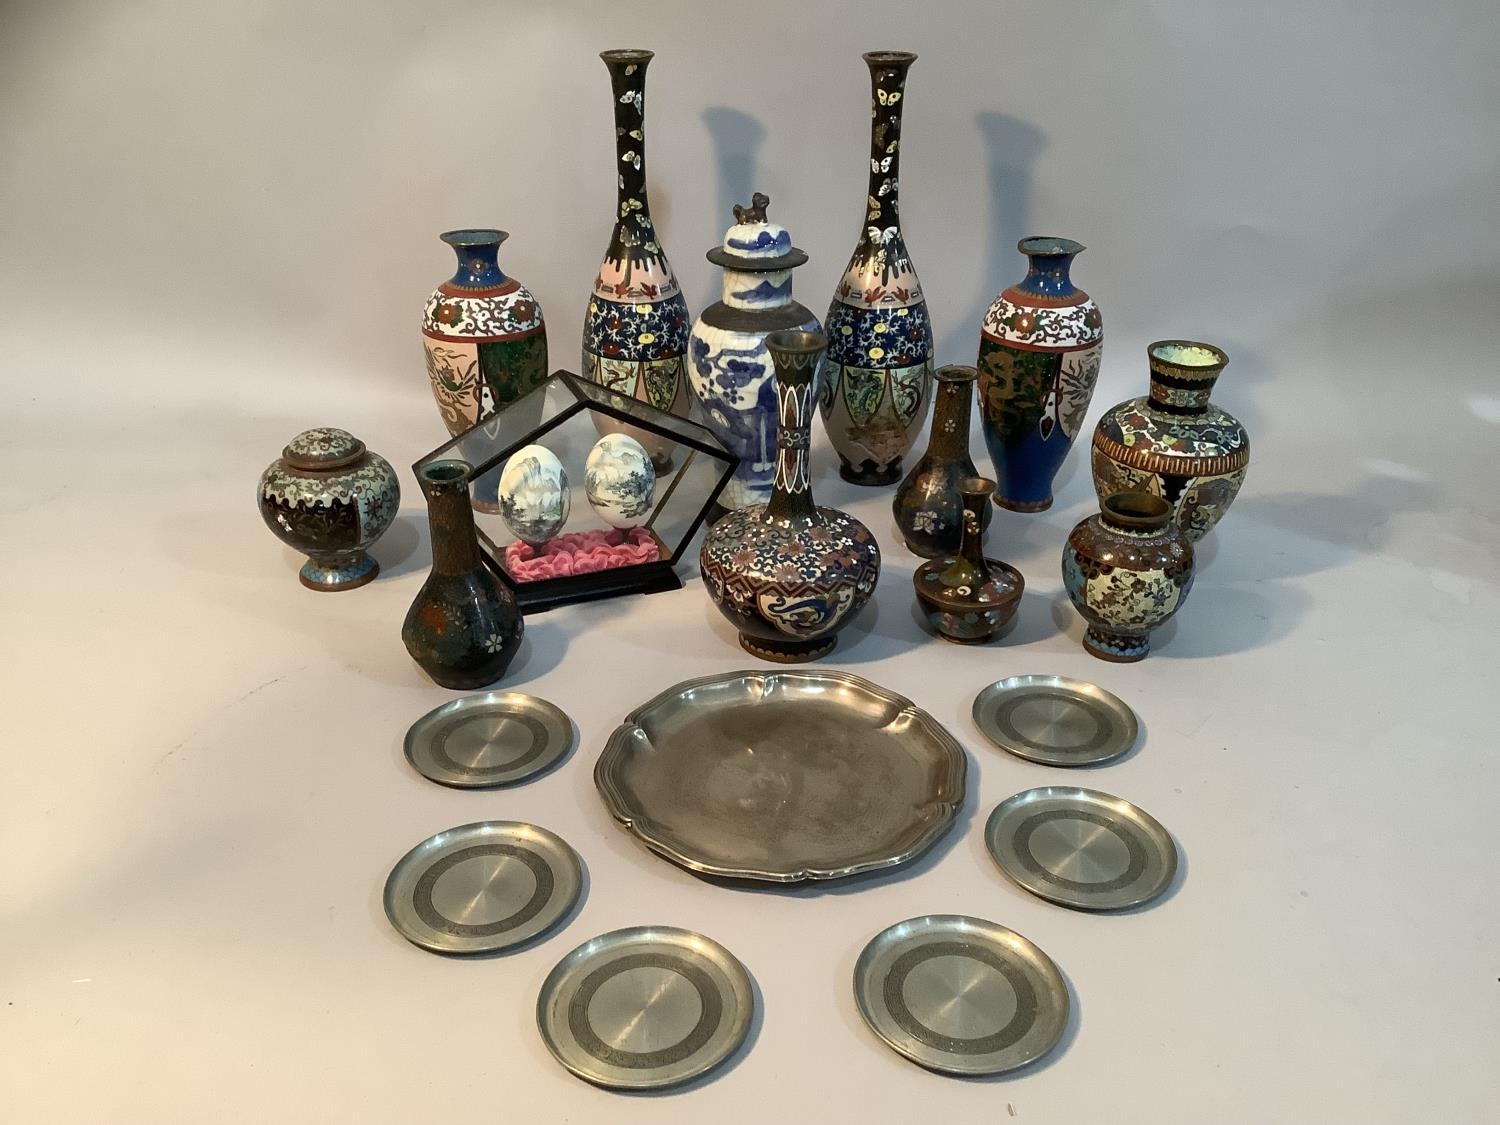 A collection of Chinese Cloisonné ware, including two pairs of vases, odd vases, vase and cover etc. - Image 2 of 4